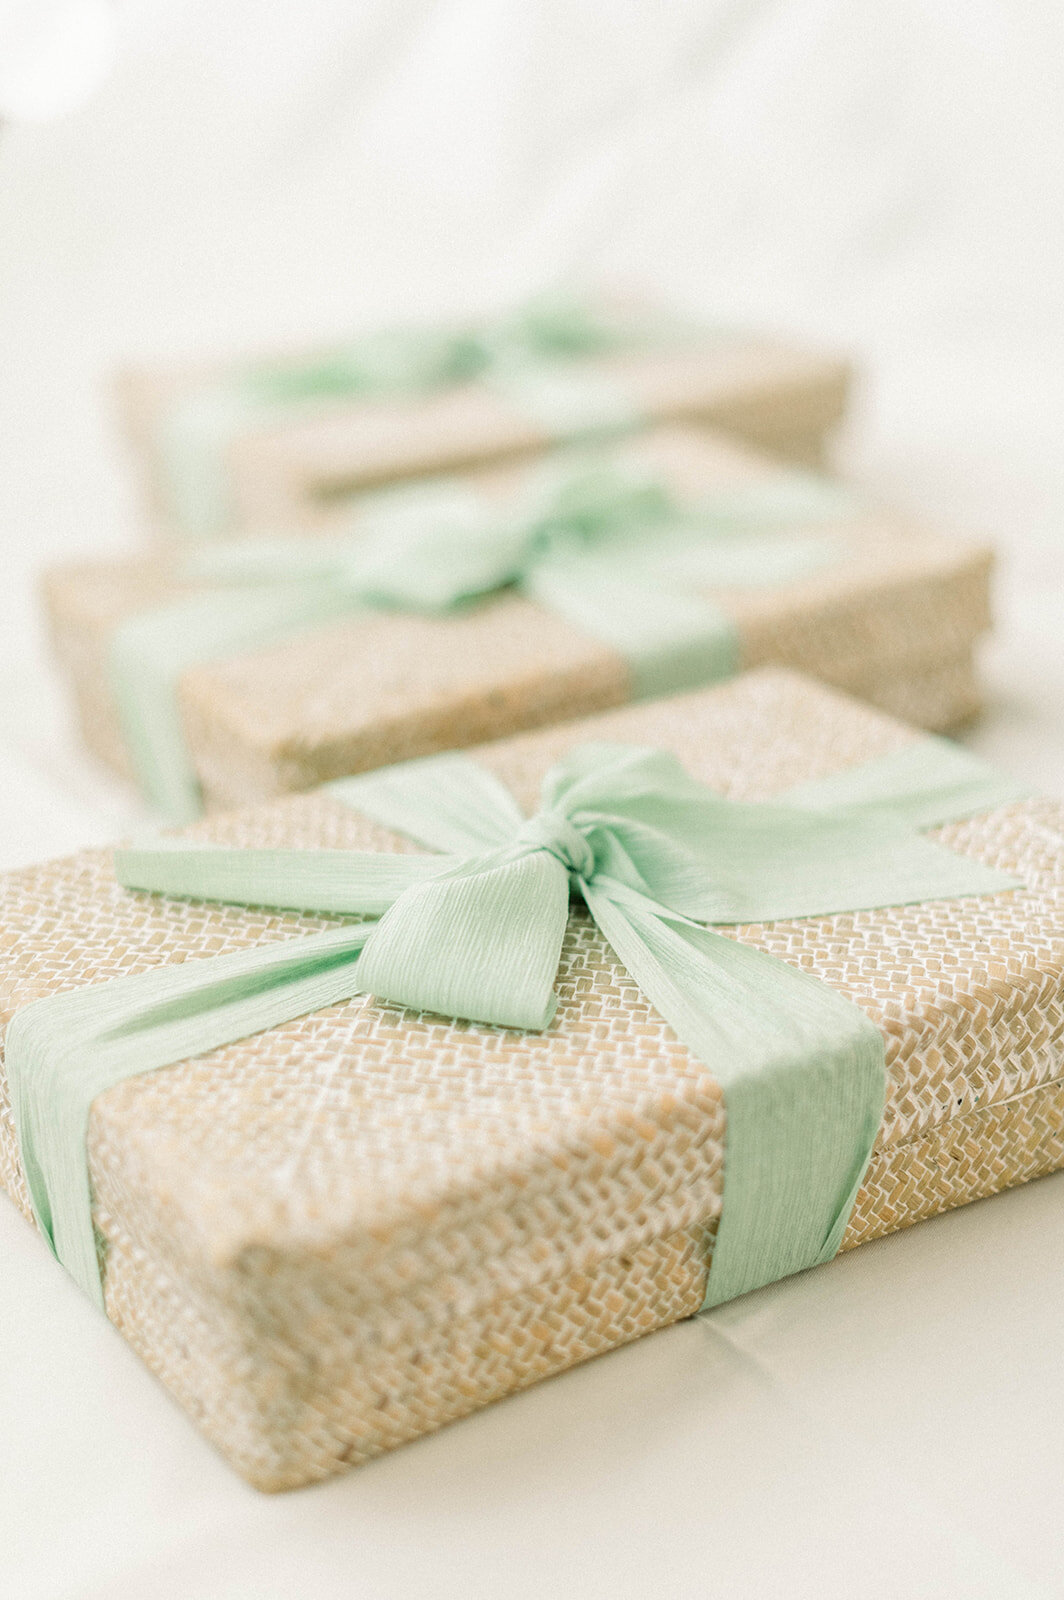 wedding-photographer-client-gifts-The-Welcoming-District